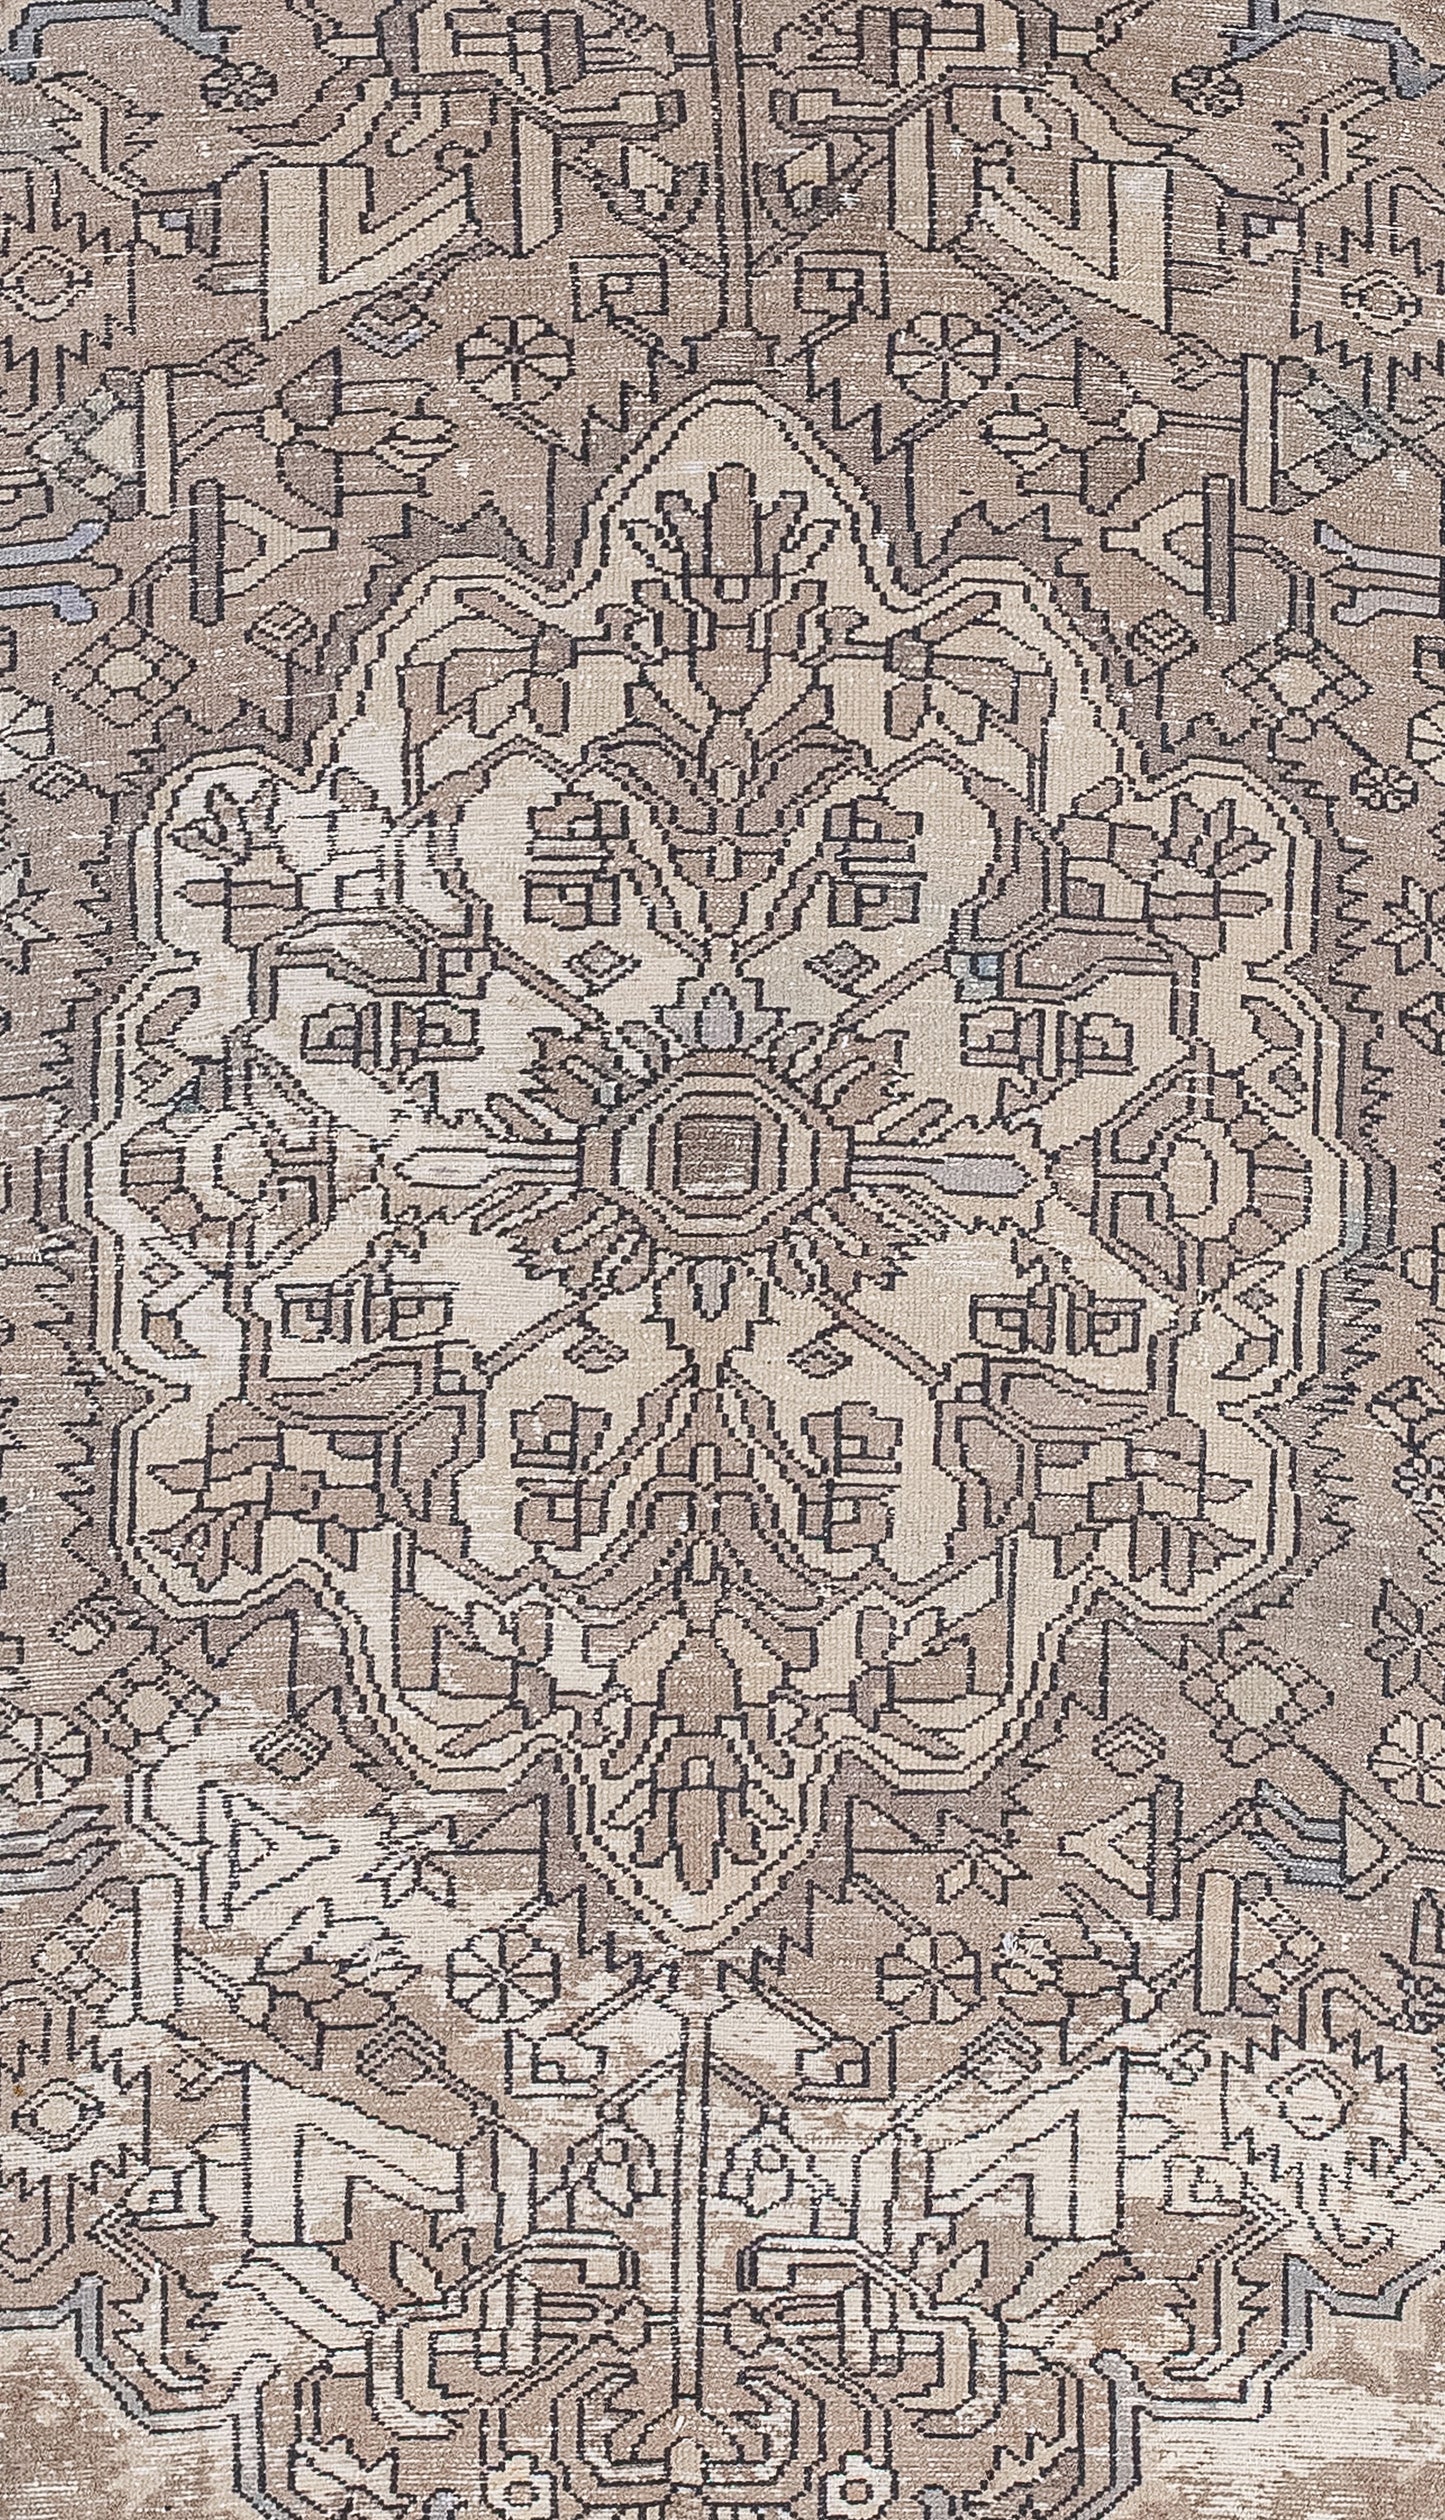 The rug's close-up features a tribal mandala filled with abstract figures, all connected to each other, and a small central square.